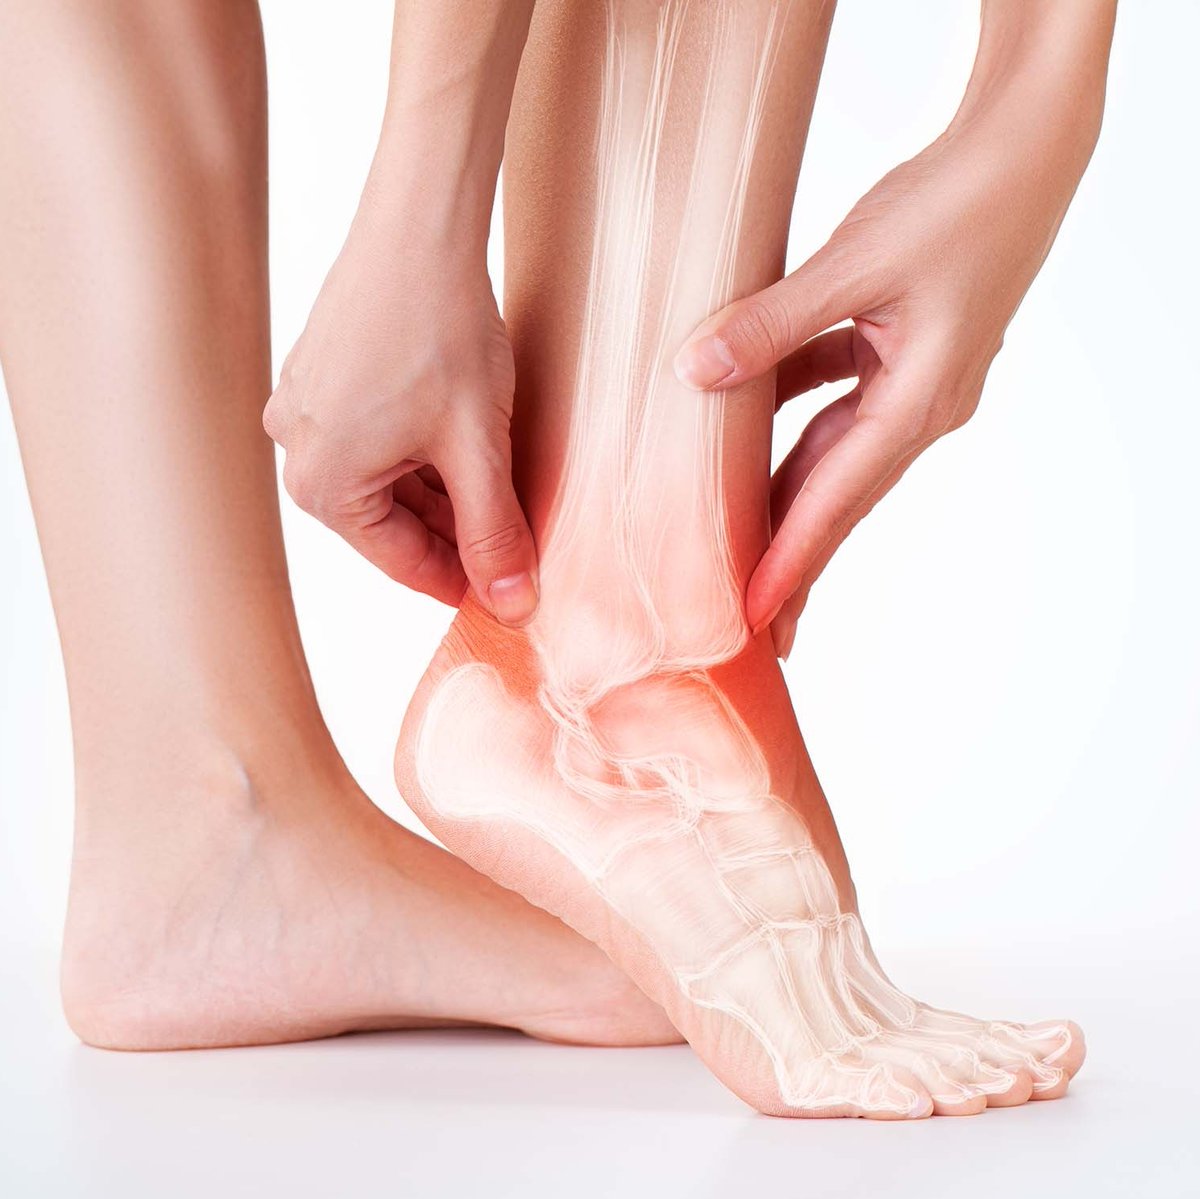 If your pain is minor and you can recall twisting your ankle or tripping, you may have a sprain. These will usually heal in one to two weeks with ice, elevation, and proper rest. Speak with your practitioner if your pain doesn’t subside or if you’re concerned.

#getanswers #aisst